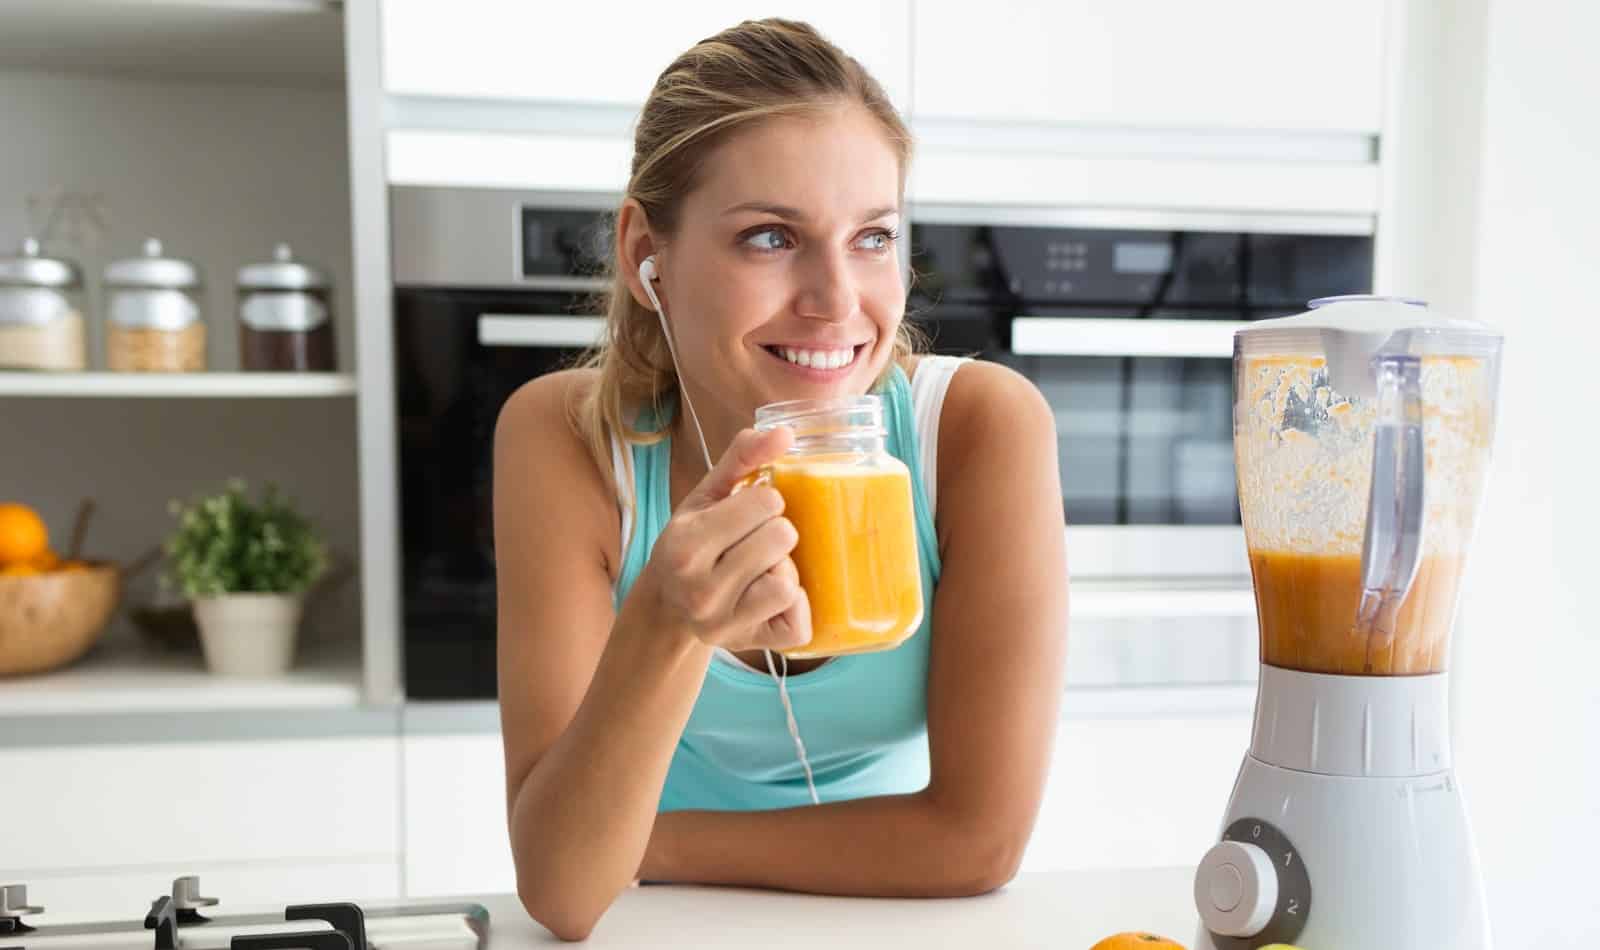 The perfect morning routine is one that refreshes you and energizes you. Use this quick and easy guide and try to improve your tomorrow. Your health and wellbeing deserve it!